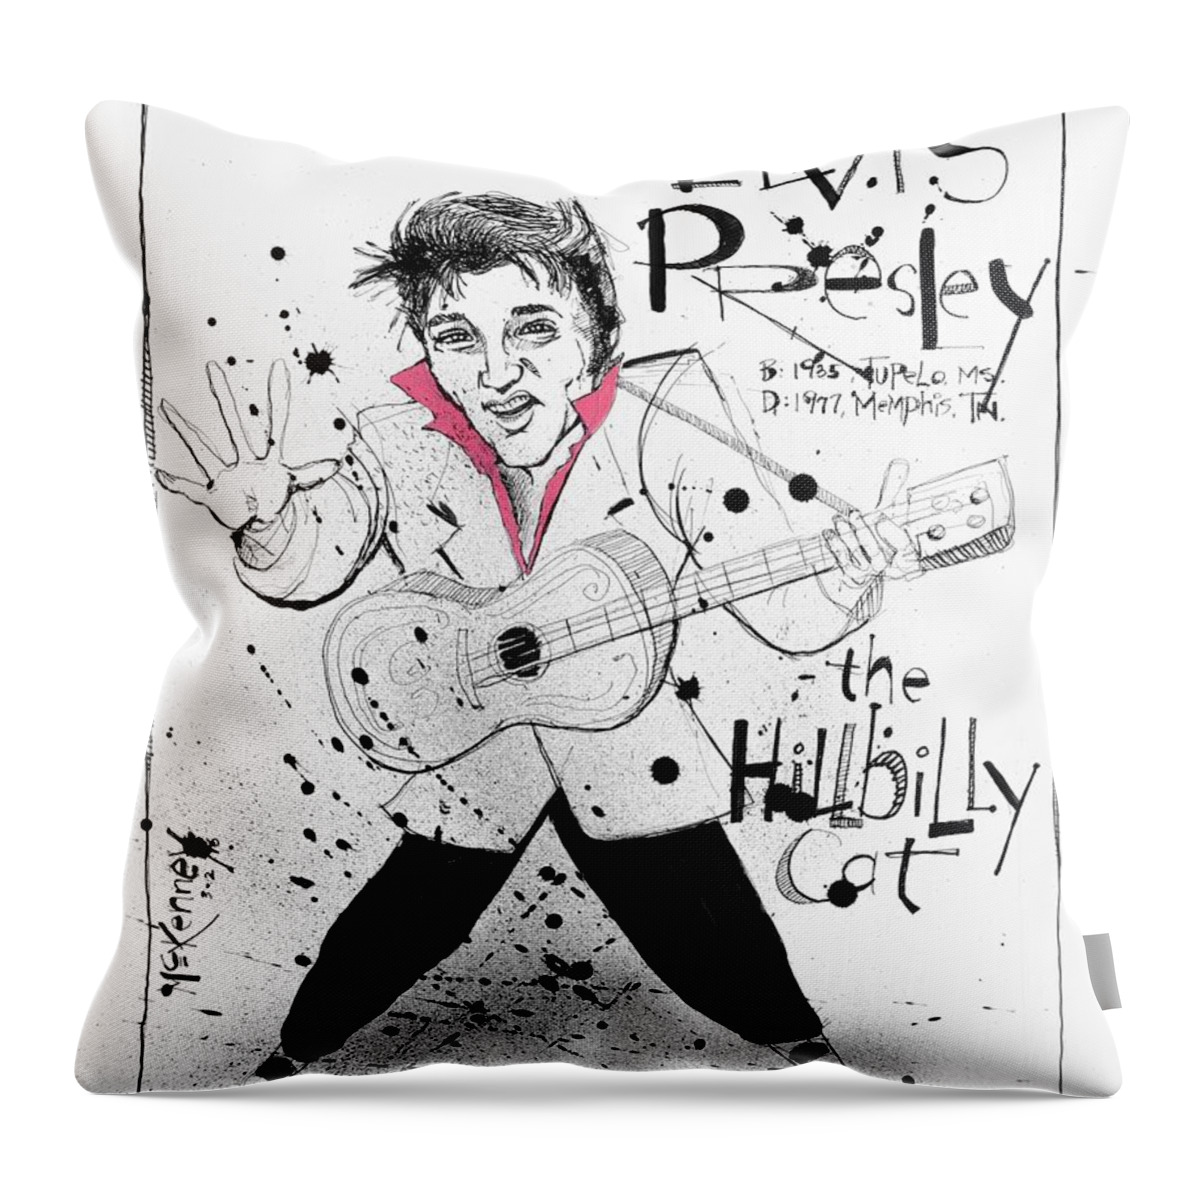  Throw Pillow featuring the drawing Elvis Presley by Phil Mckenney